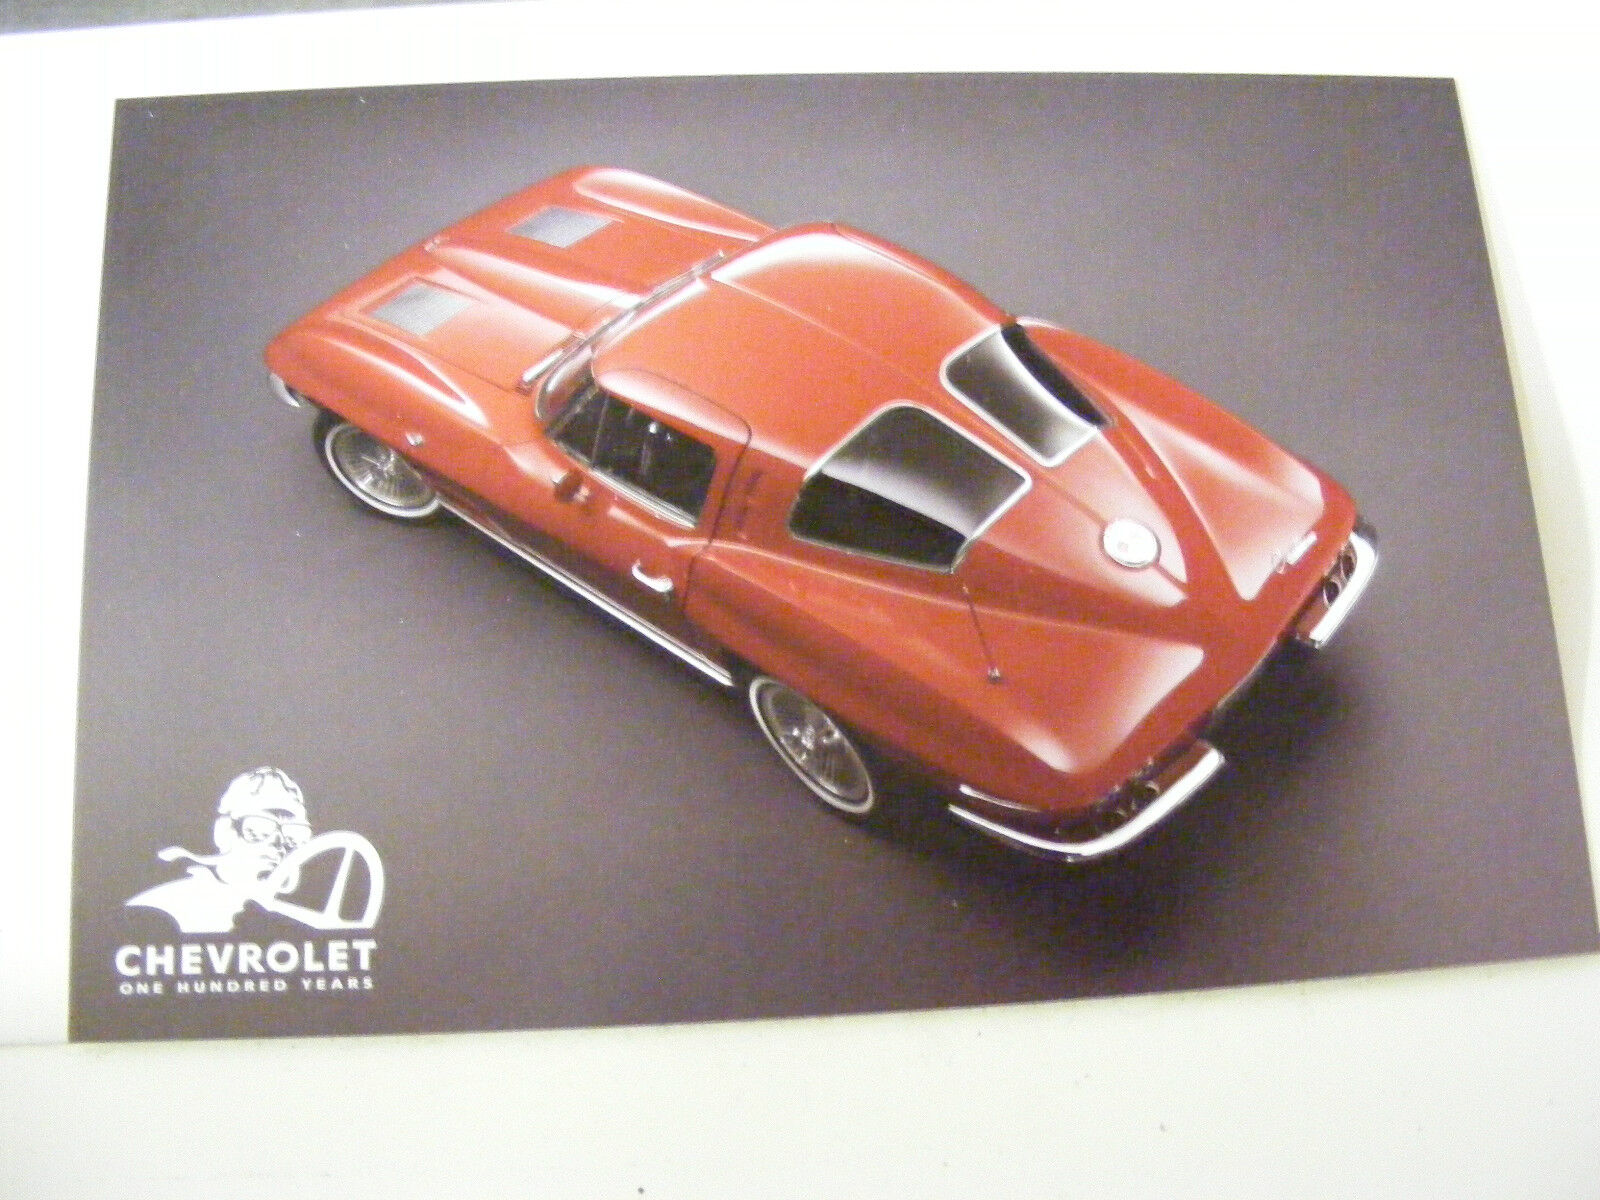 1963 CHEVROLET CORVETTE STING RAY COUPE HERITAGE ONE HUNDRED YEARS POSTCARD NEW